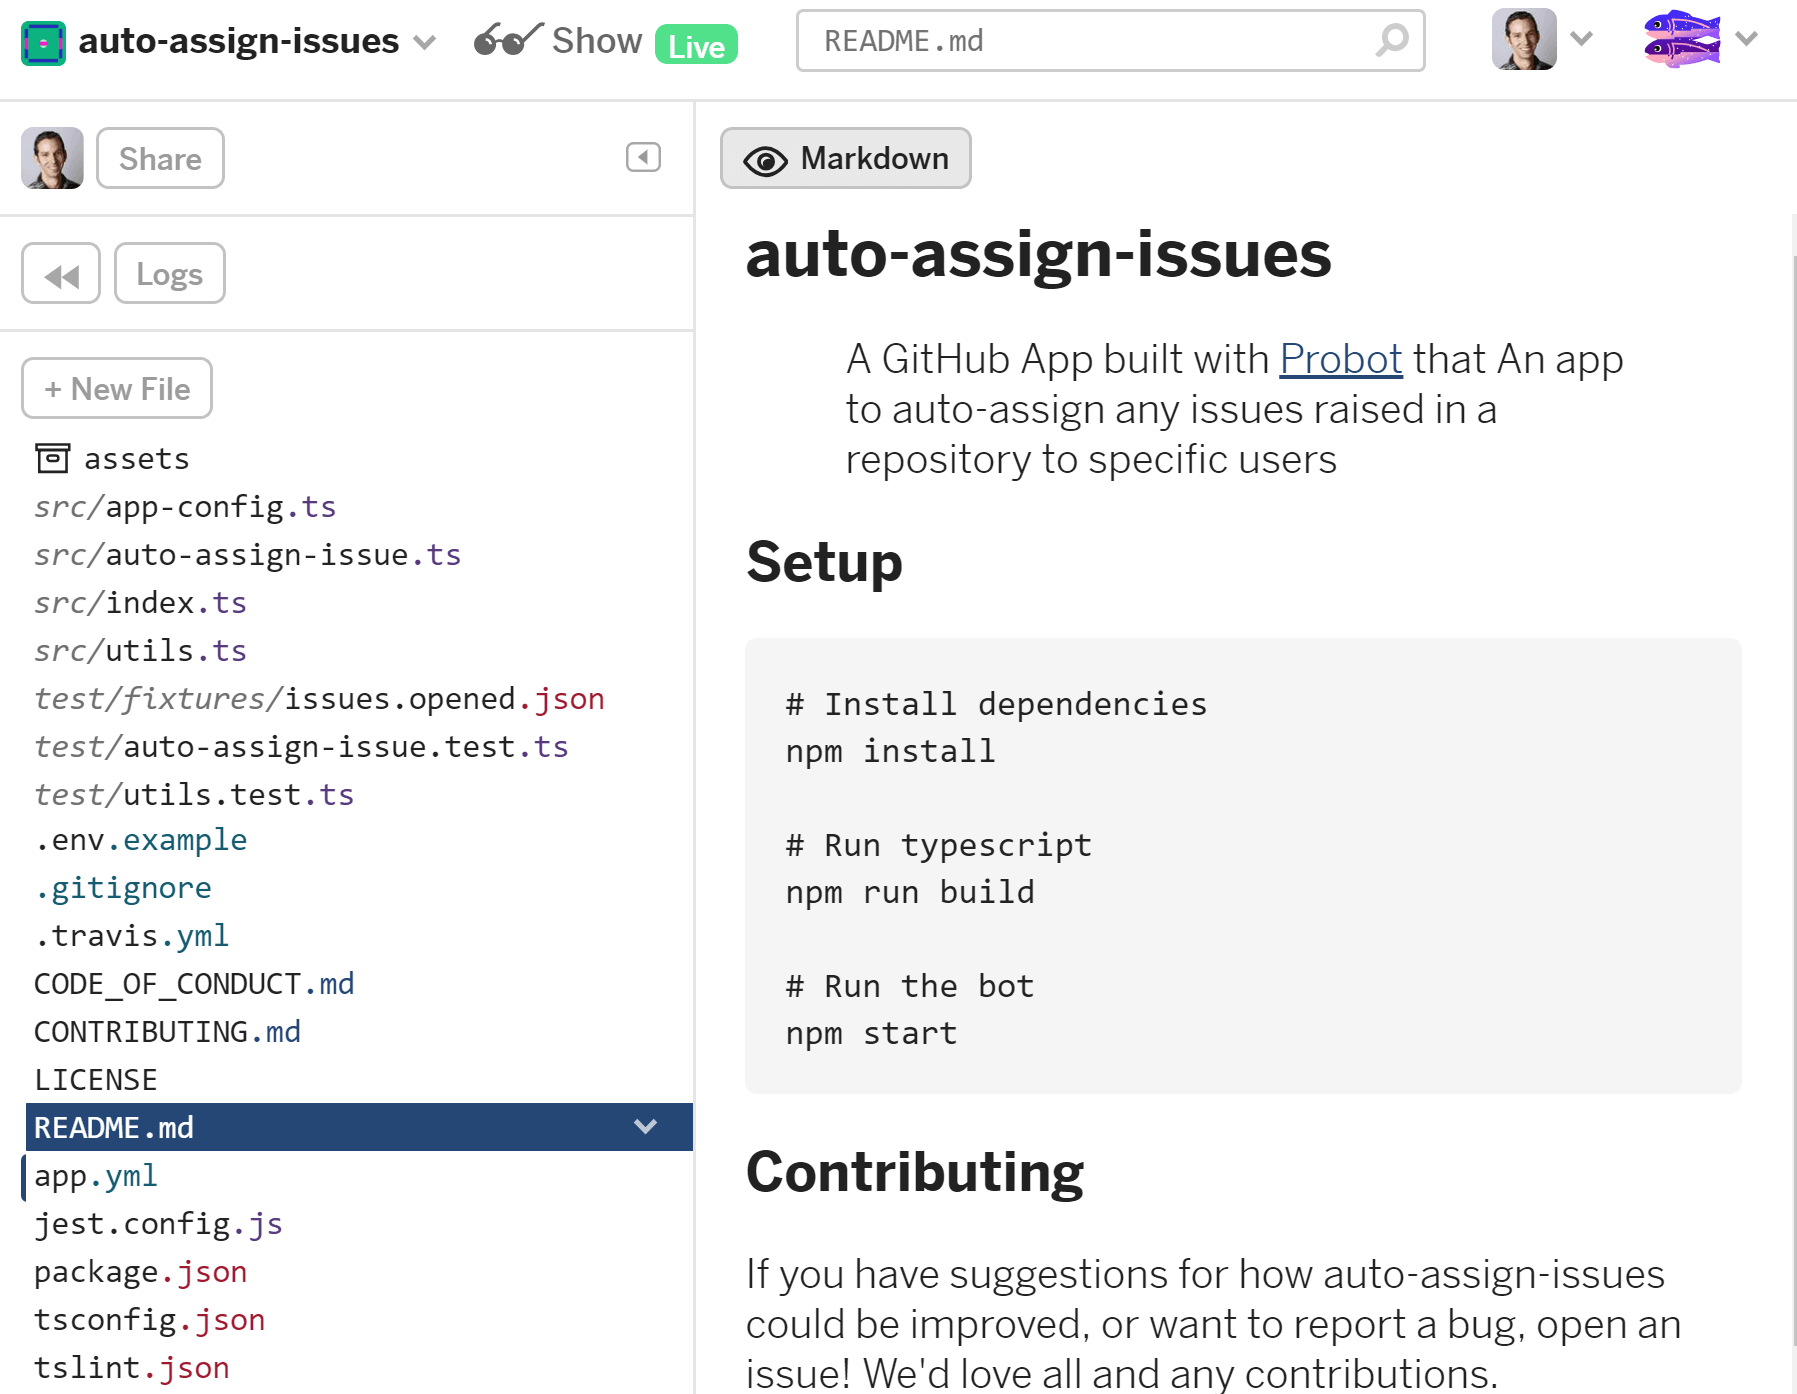 The auto-assign-issues app imported into GitHub